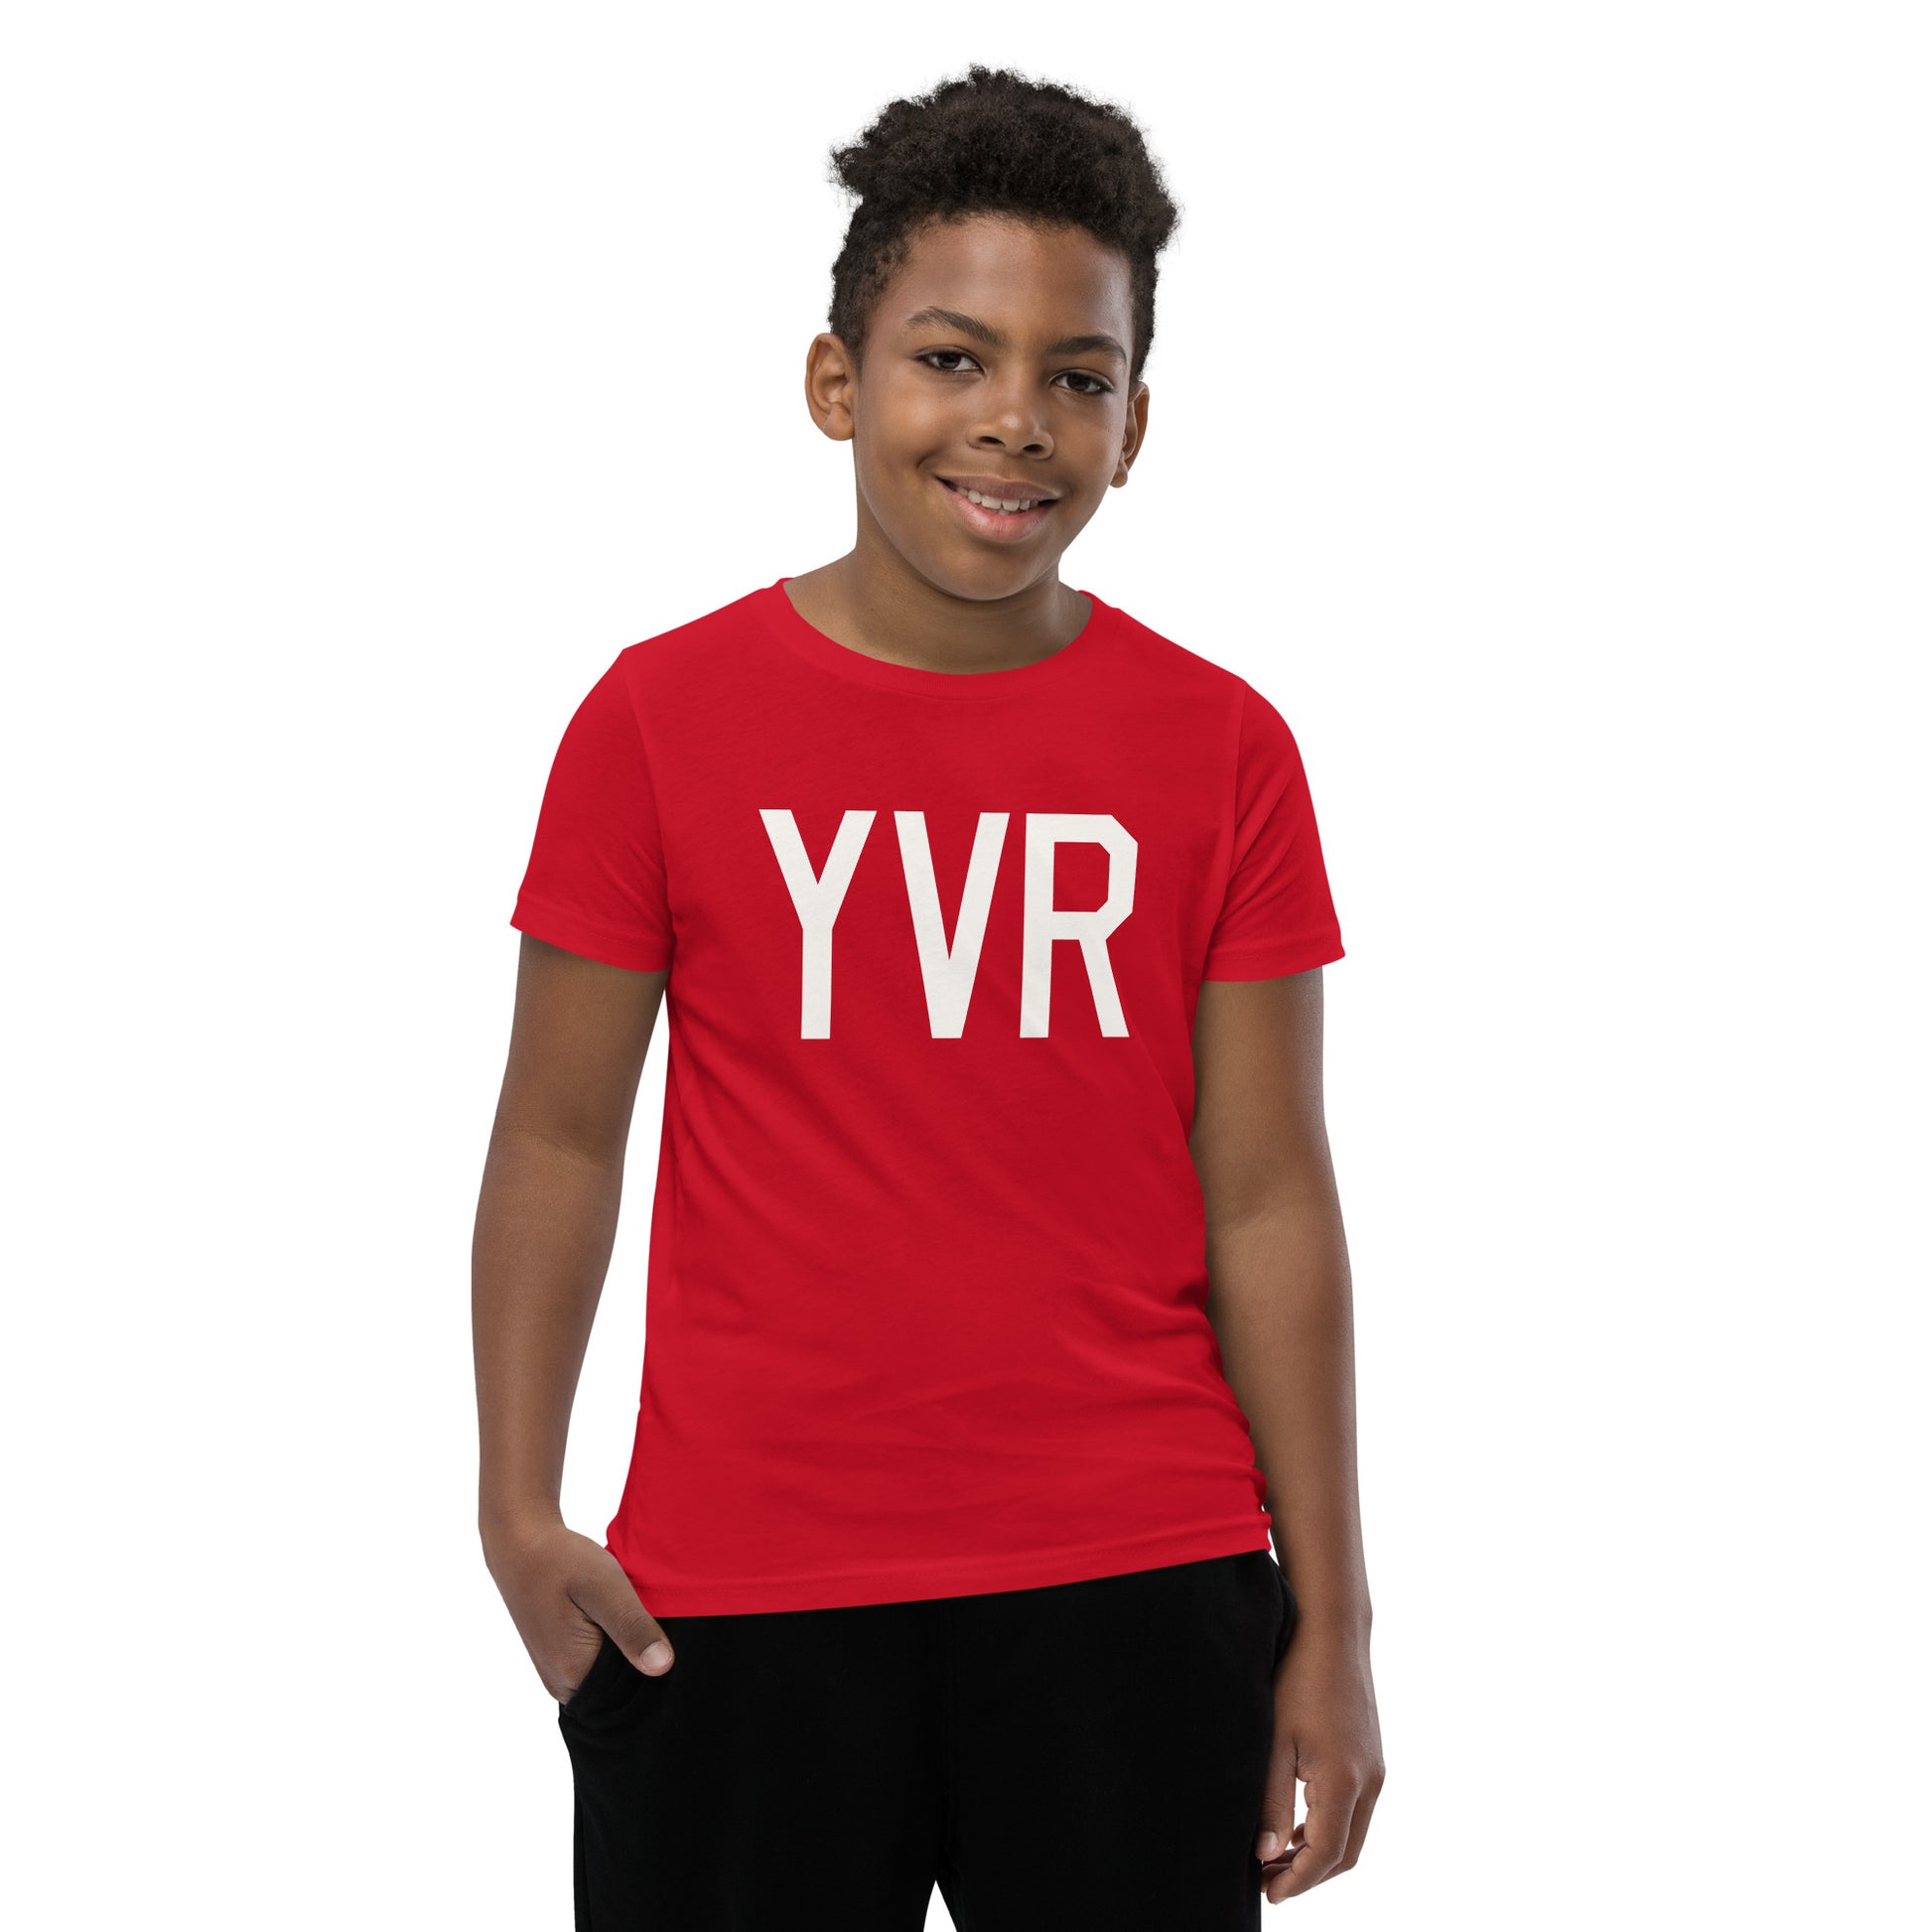 Kid's T-Shirt - White Graphic • YVR Vancouver • YHM Designs - Image 09